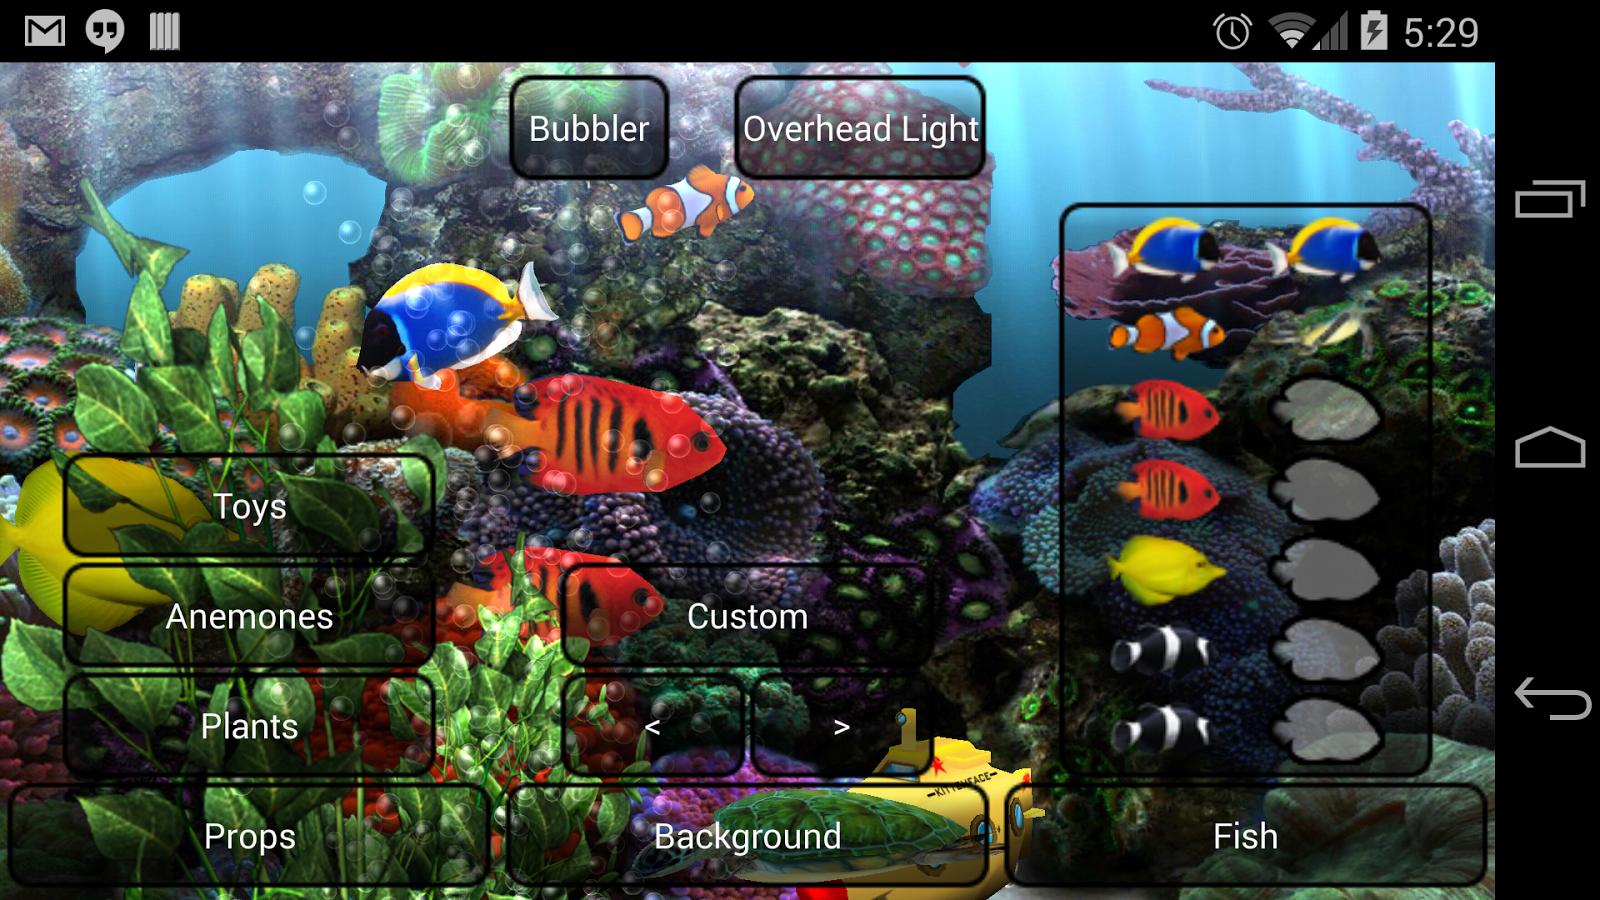 Free download Aquarium Live Wallpaper Android Apps on Google Play